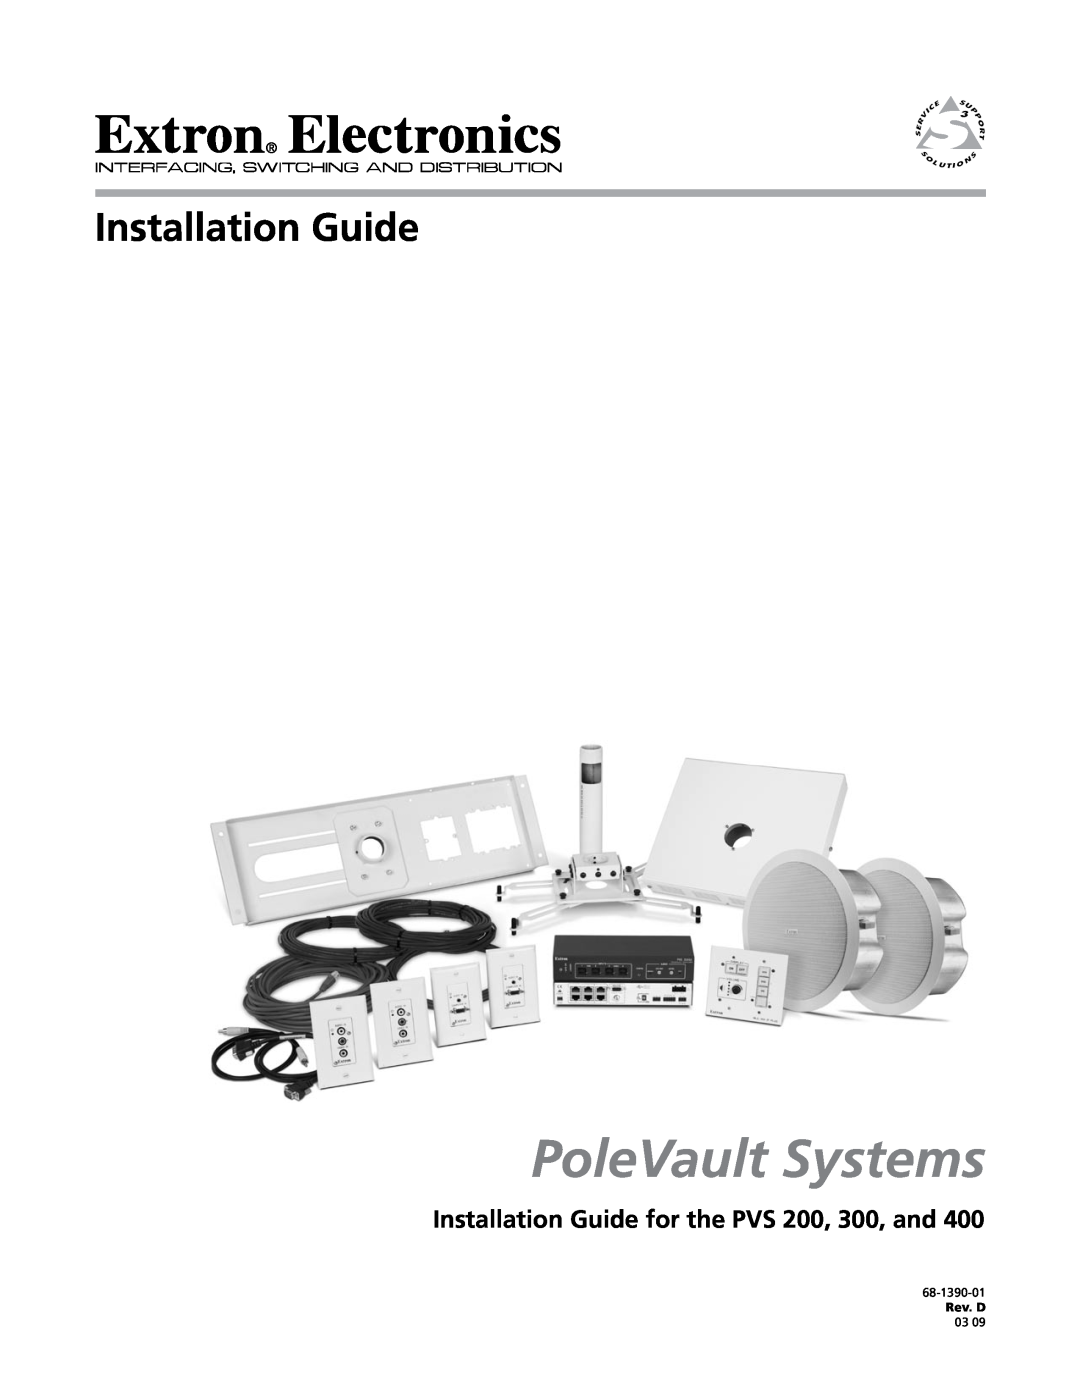 Extron electronic manual USB PowerPlate 200 Series Installation Guide, Connectors 